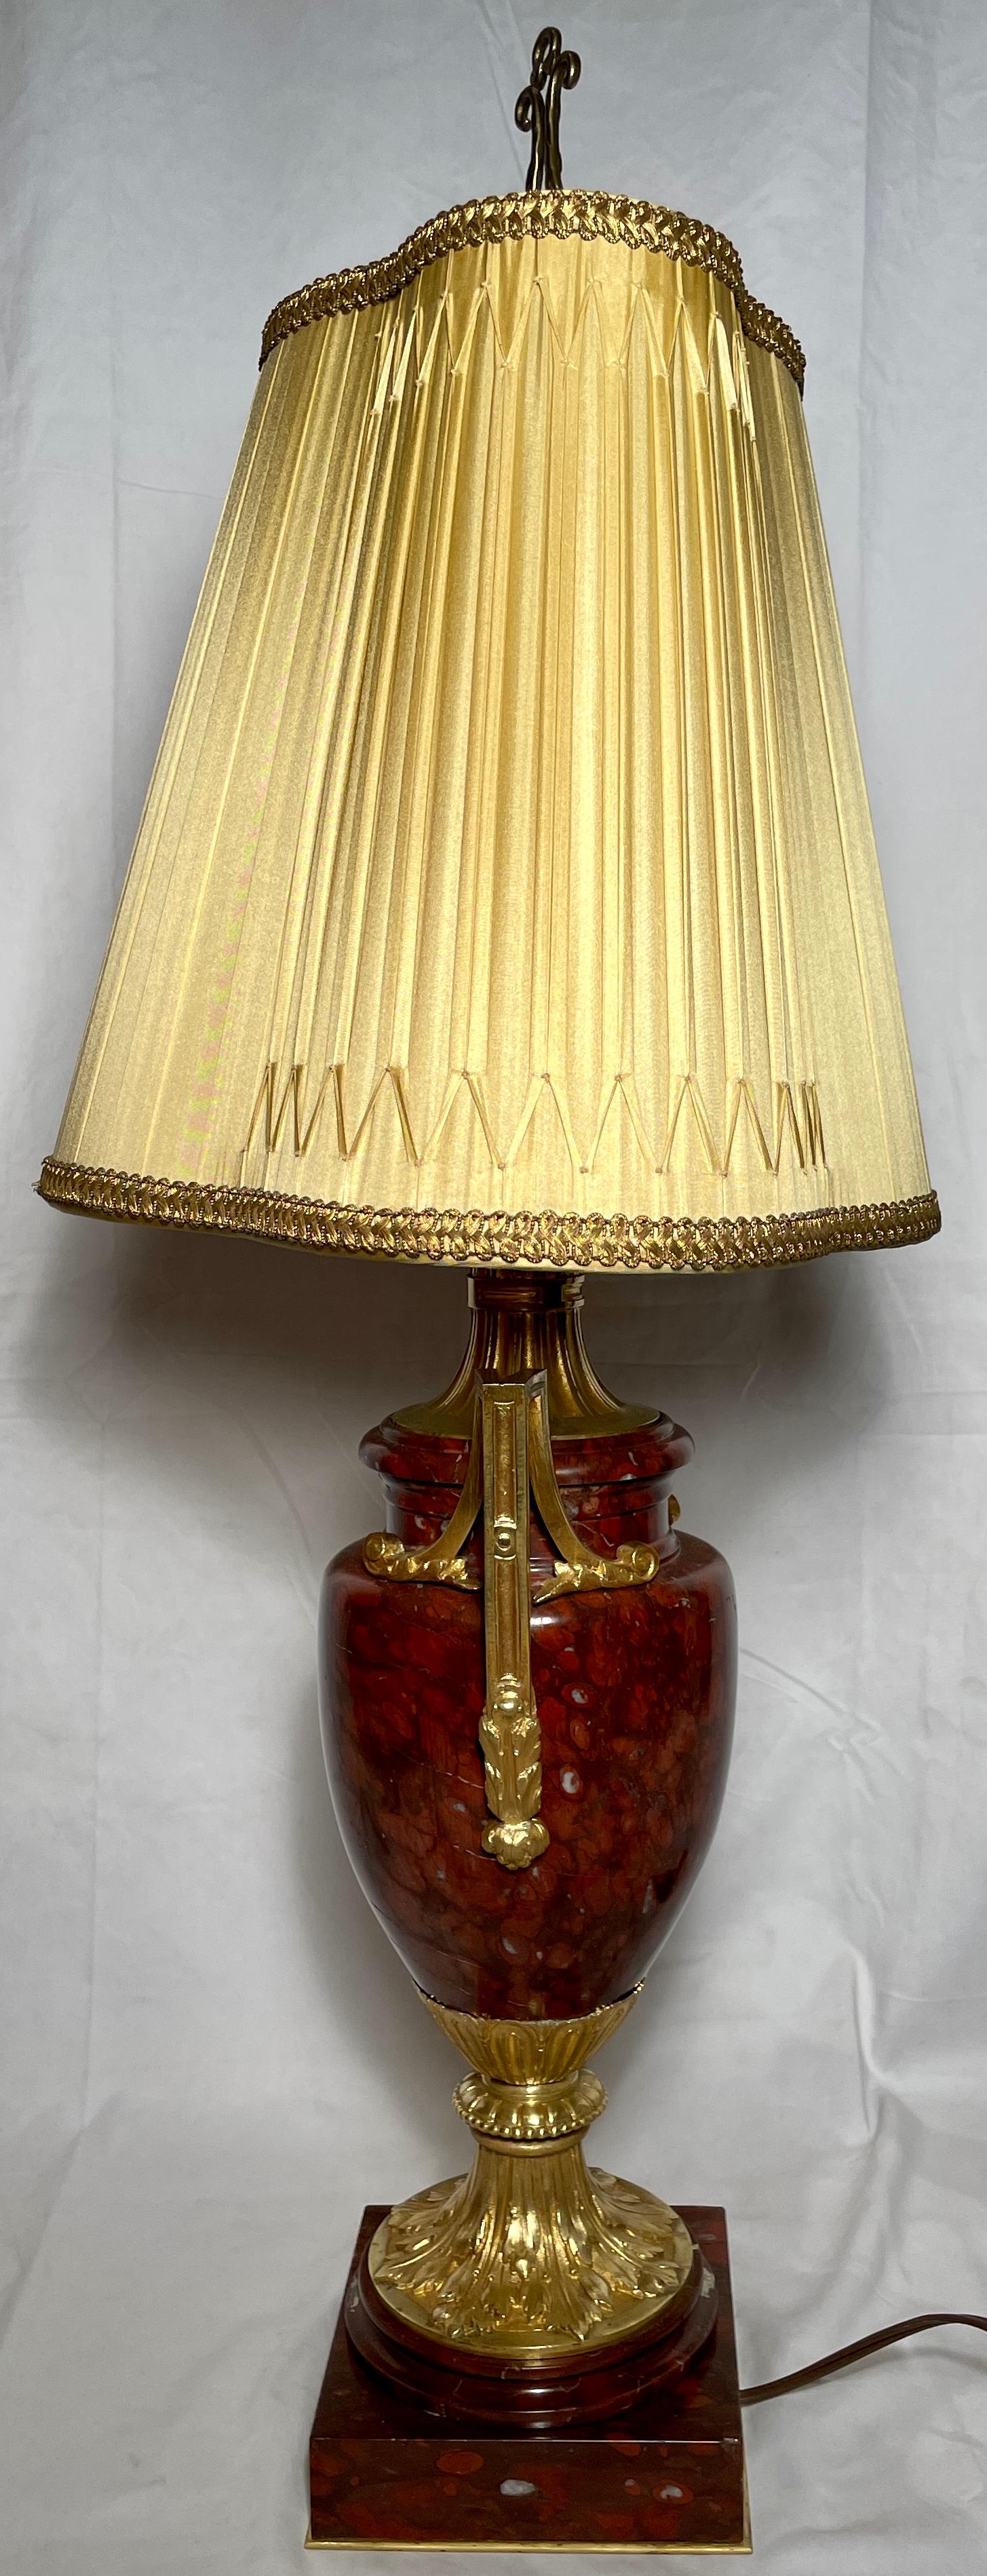 Pair Antique French Napoleon III Ormolu Mounted Red Marble Lamps w/ Silk Shades In Good Condition For Sale In New Orleans, LA